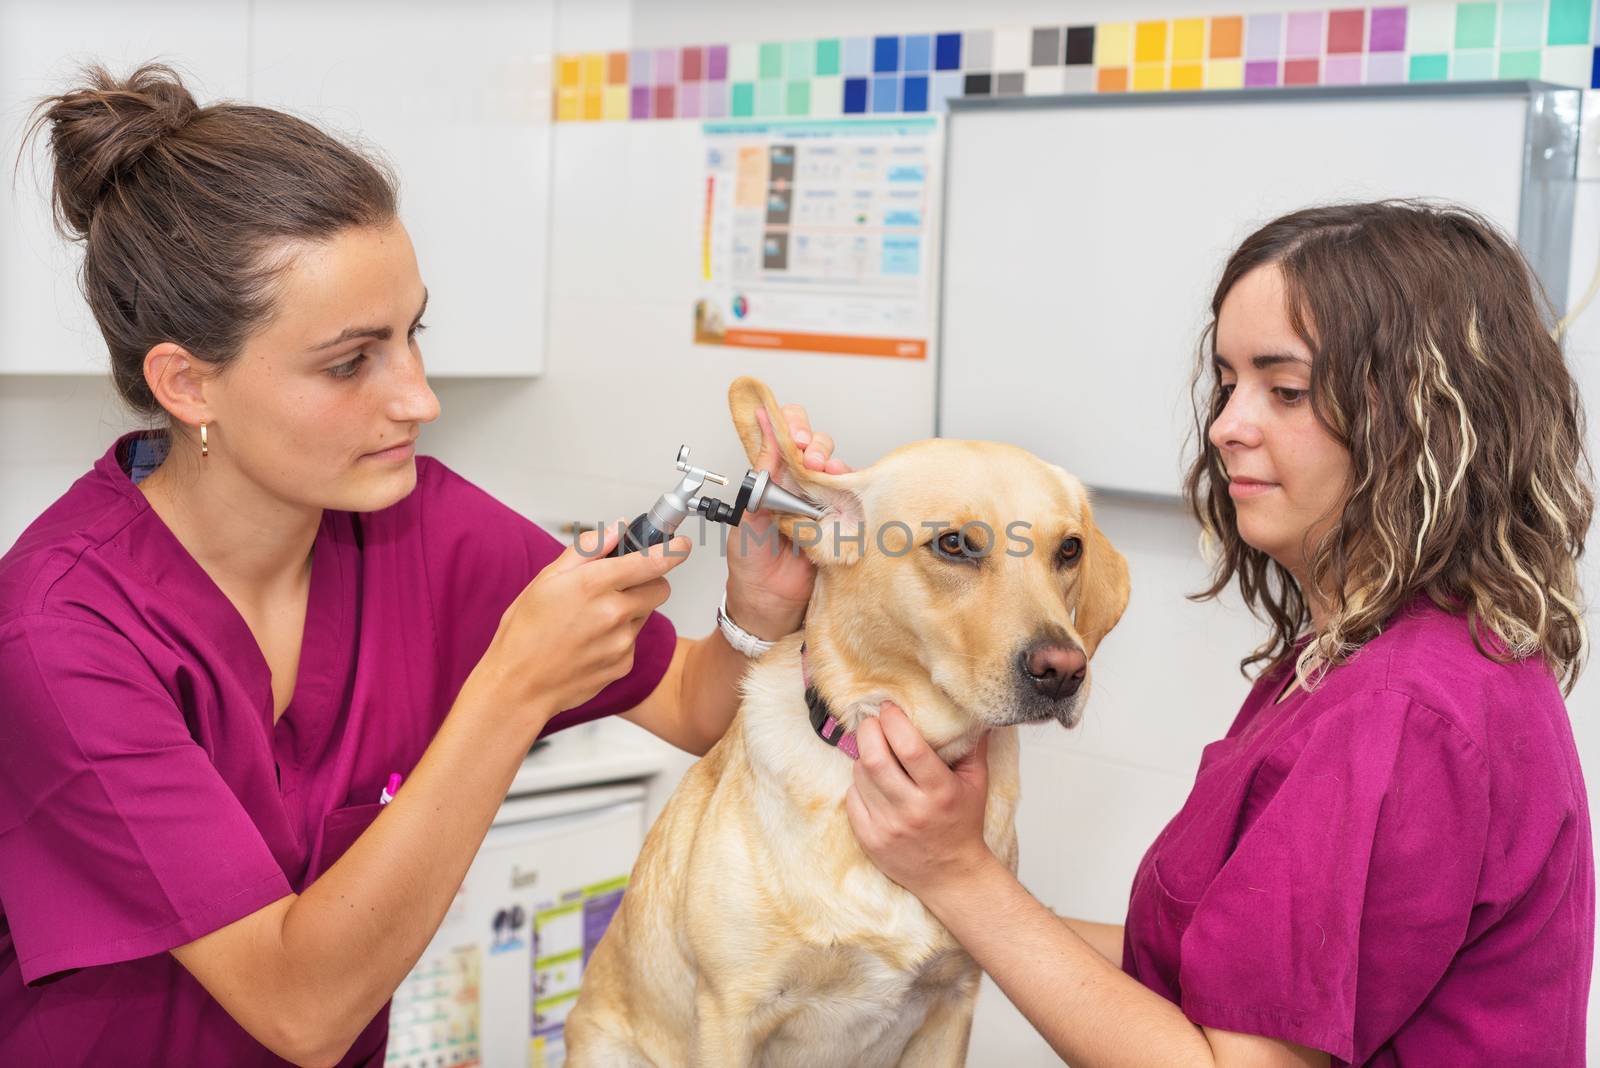 Hearing checkup of a dog in veterinary clinic